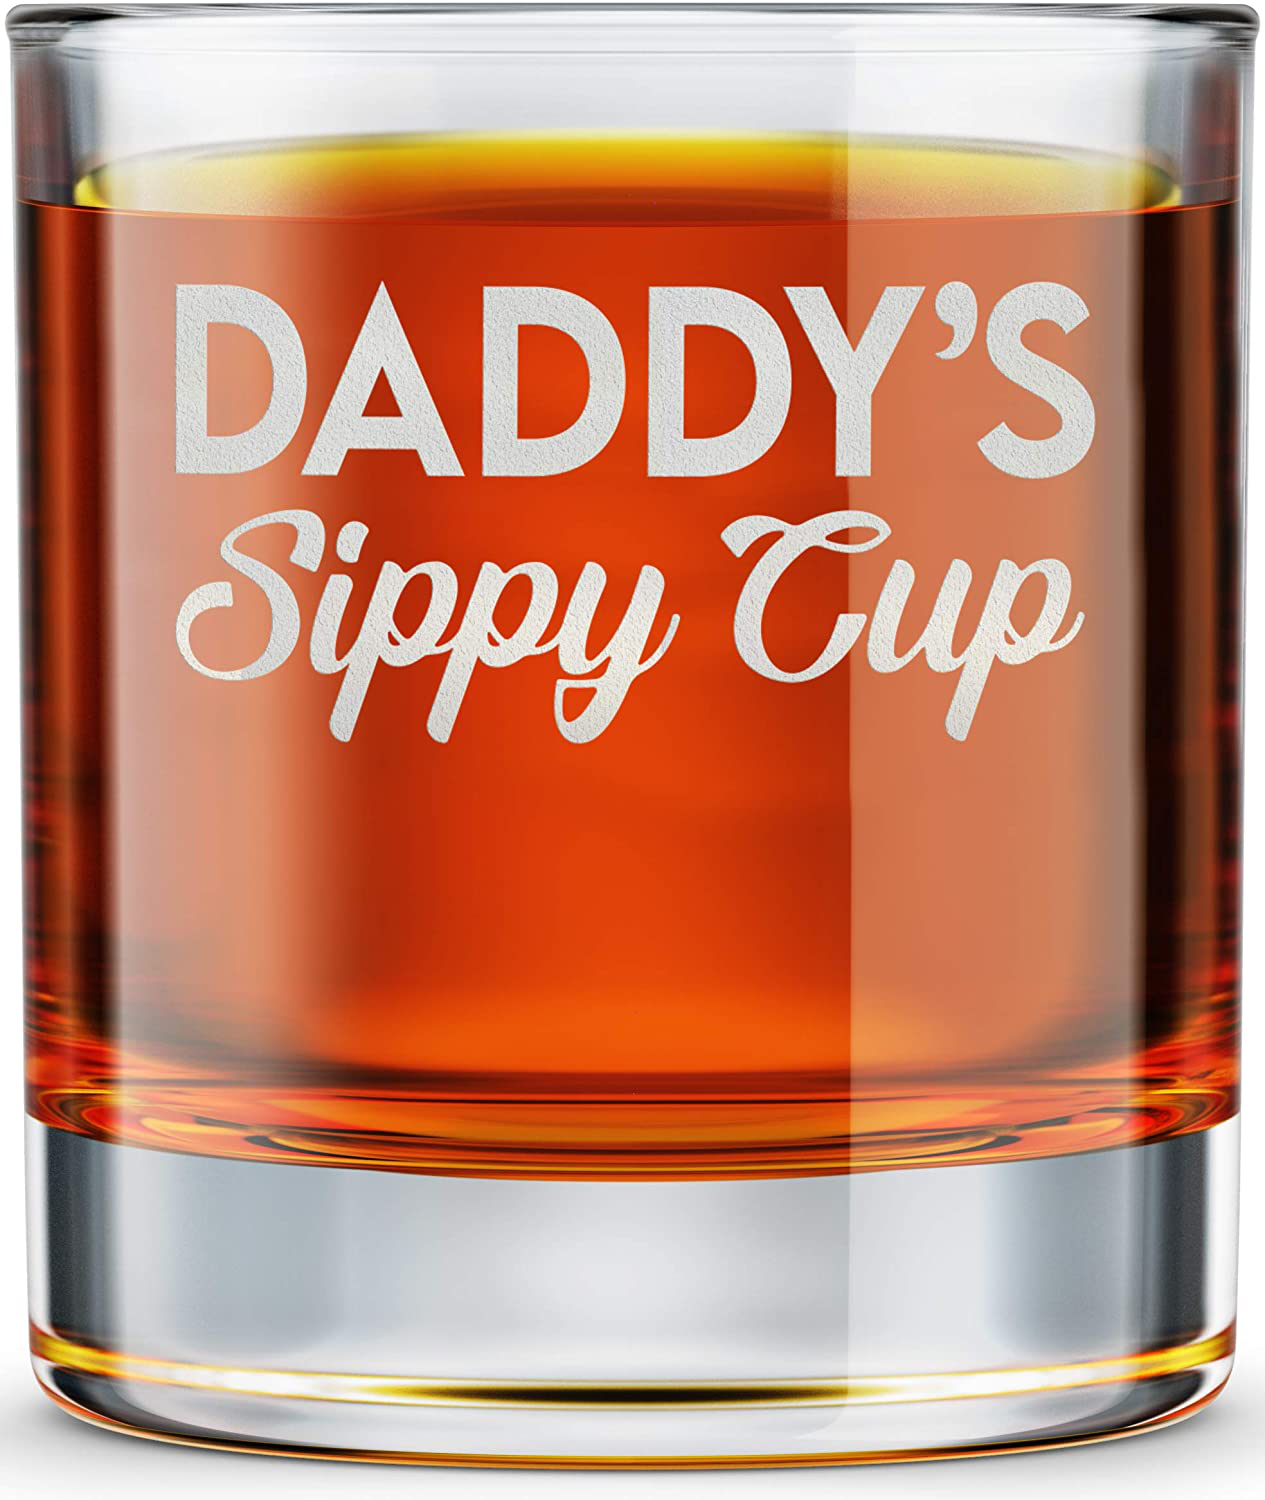 DADDY FACTORY Daddy's Sippy Cup Whiskey Glass - Funny New Dad Gifts - 10.25 oz Engraved Old Fashioned Bourbon Rocks Glass for Expecting Father, Dad Birthday Gift